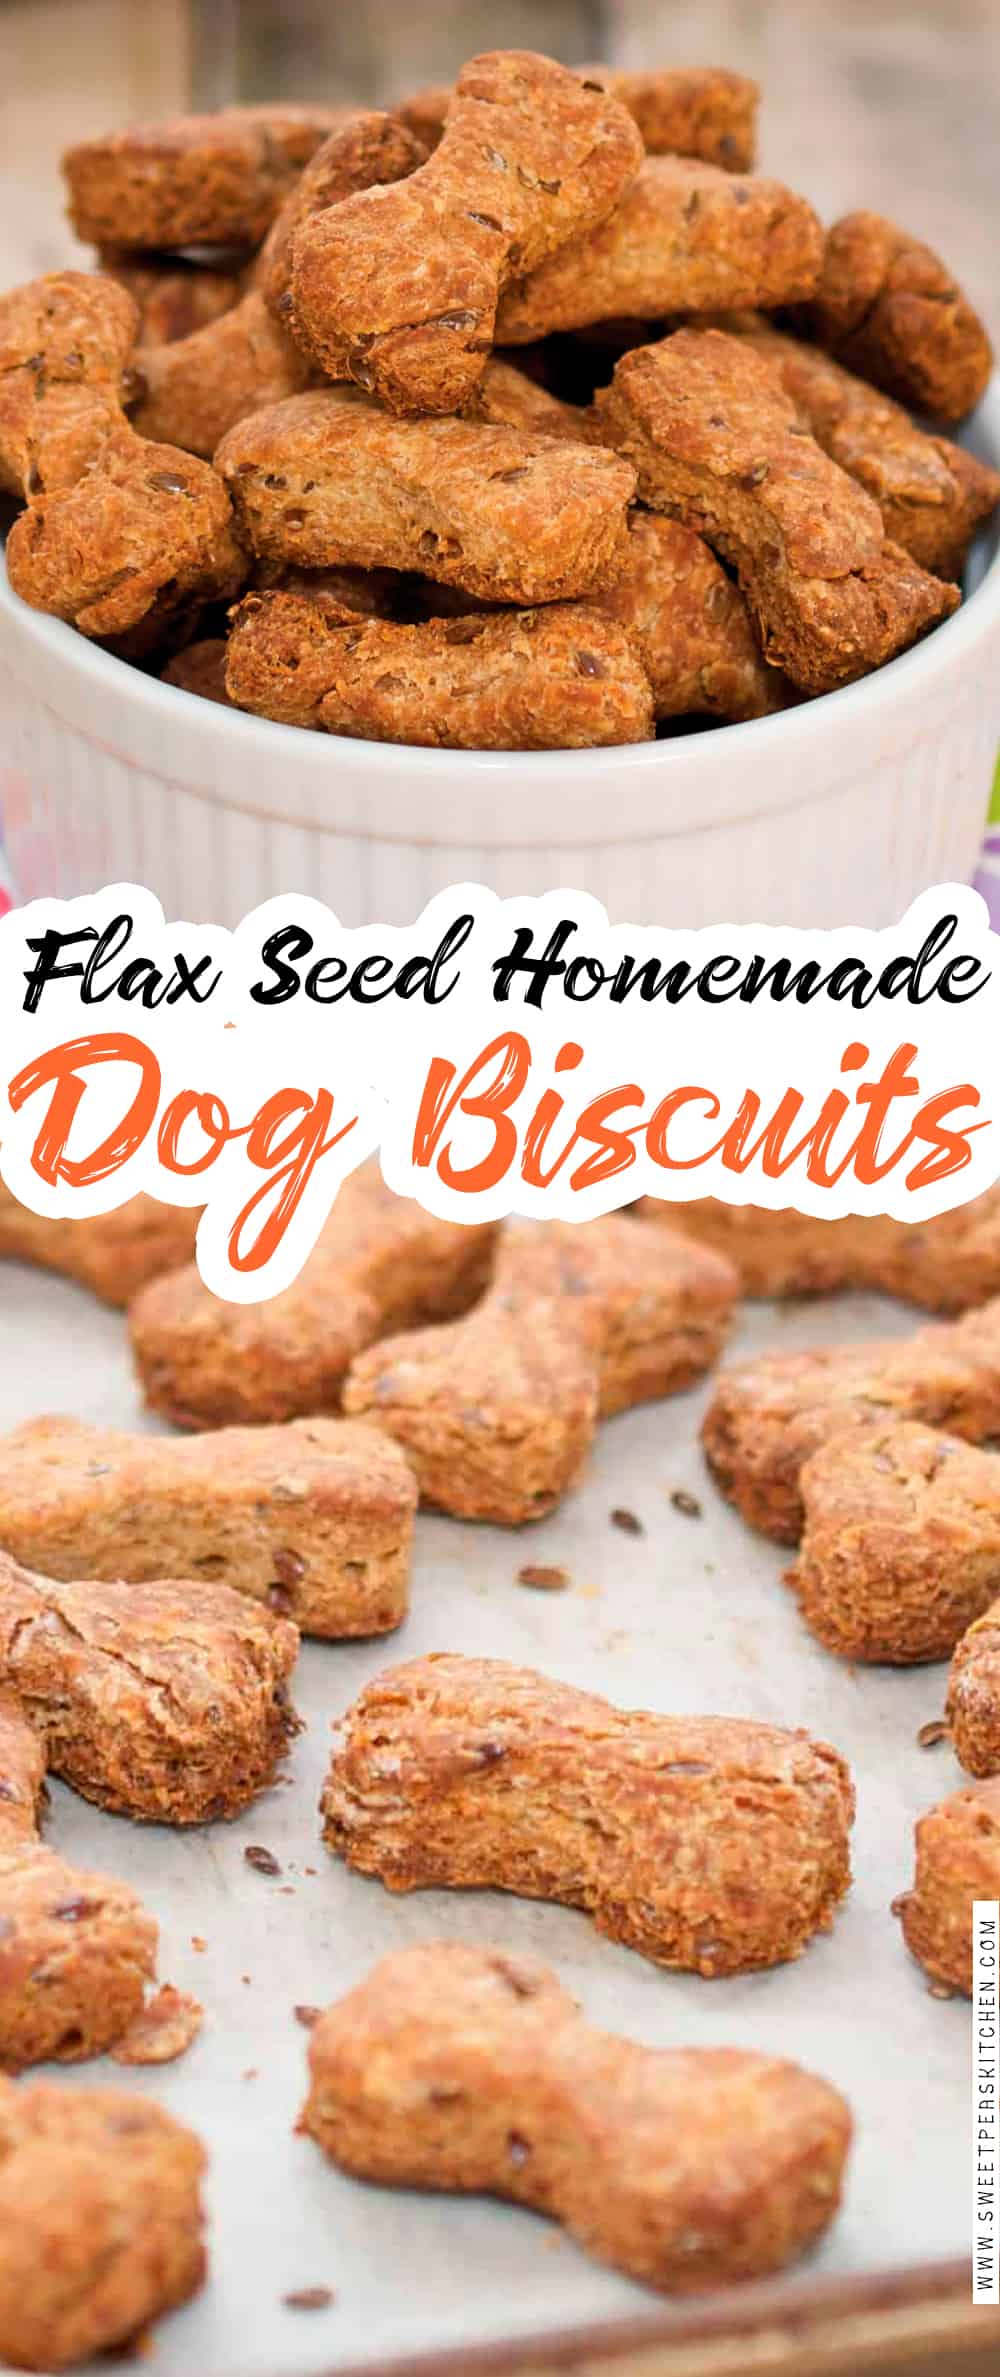 Flax Seed Homemade Dog Biscuits 